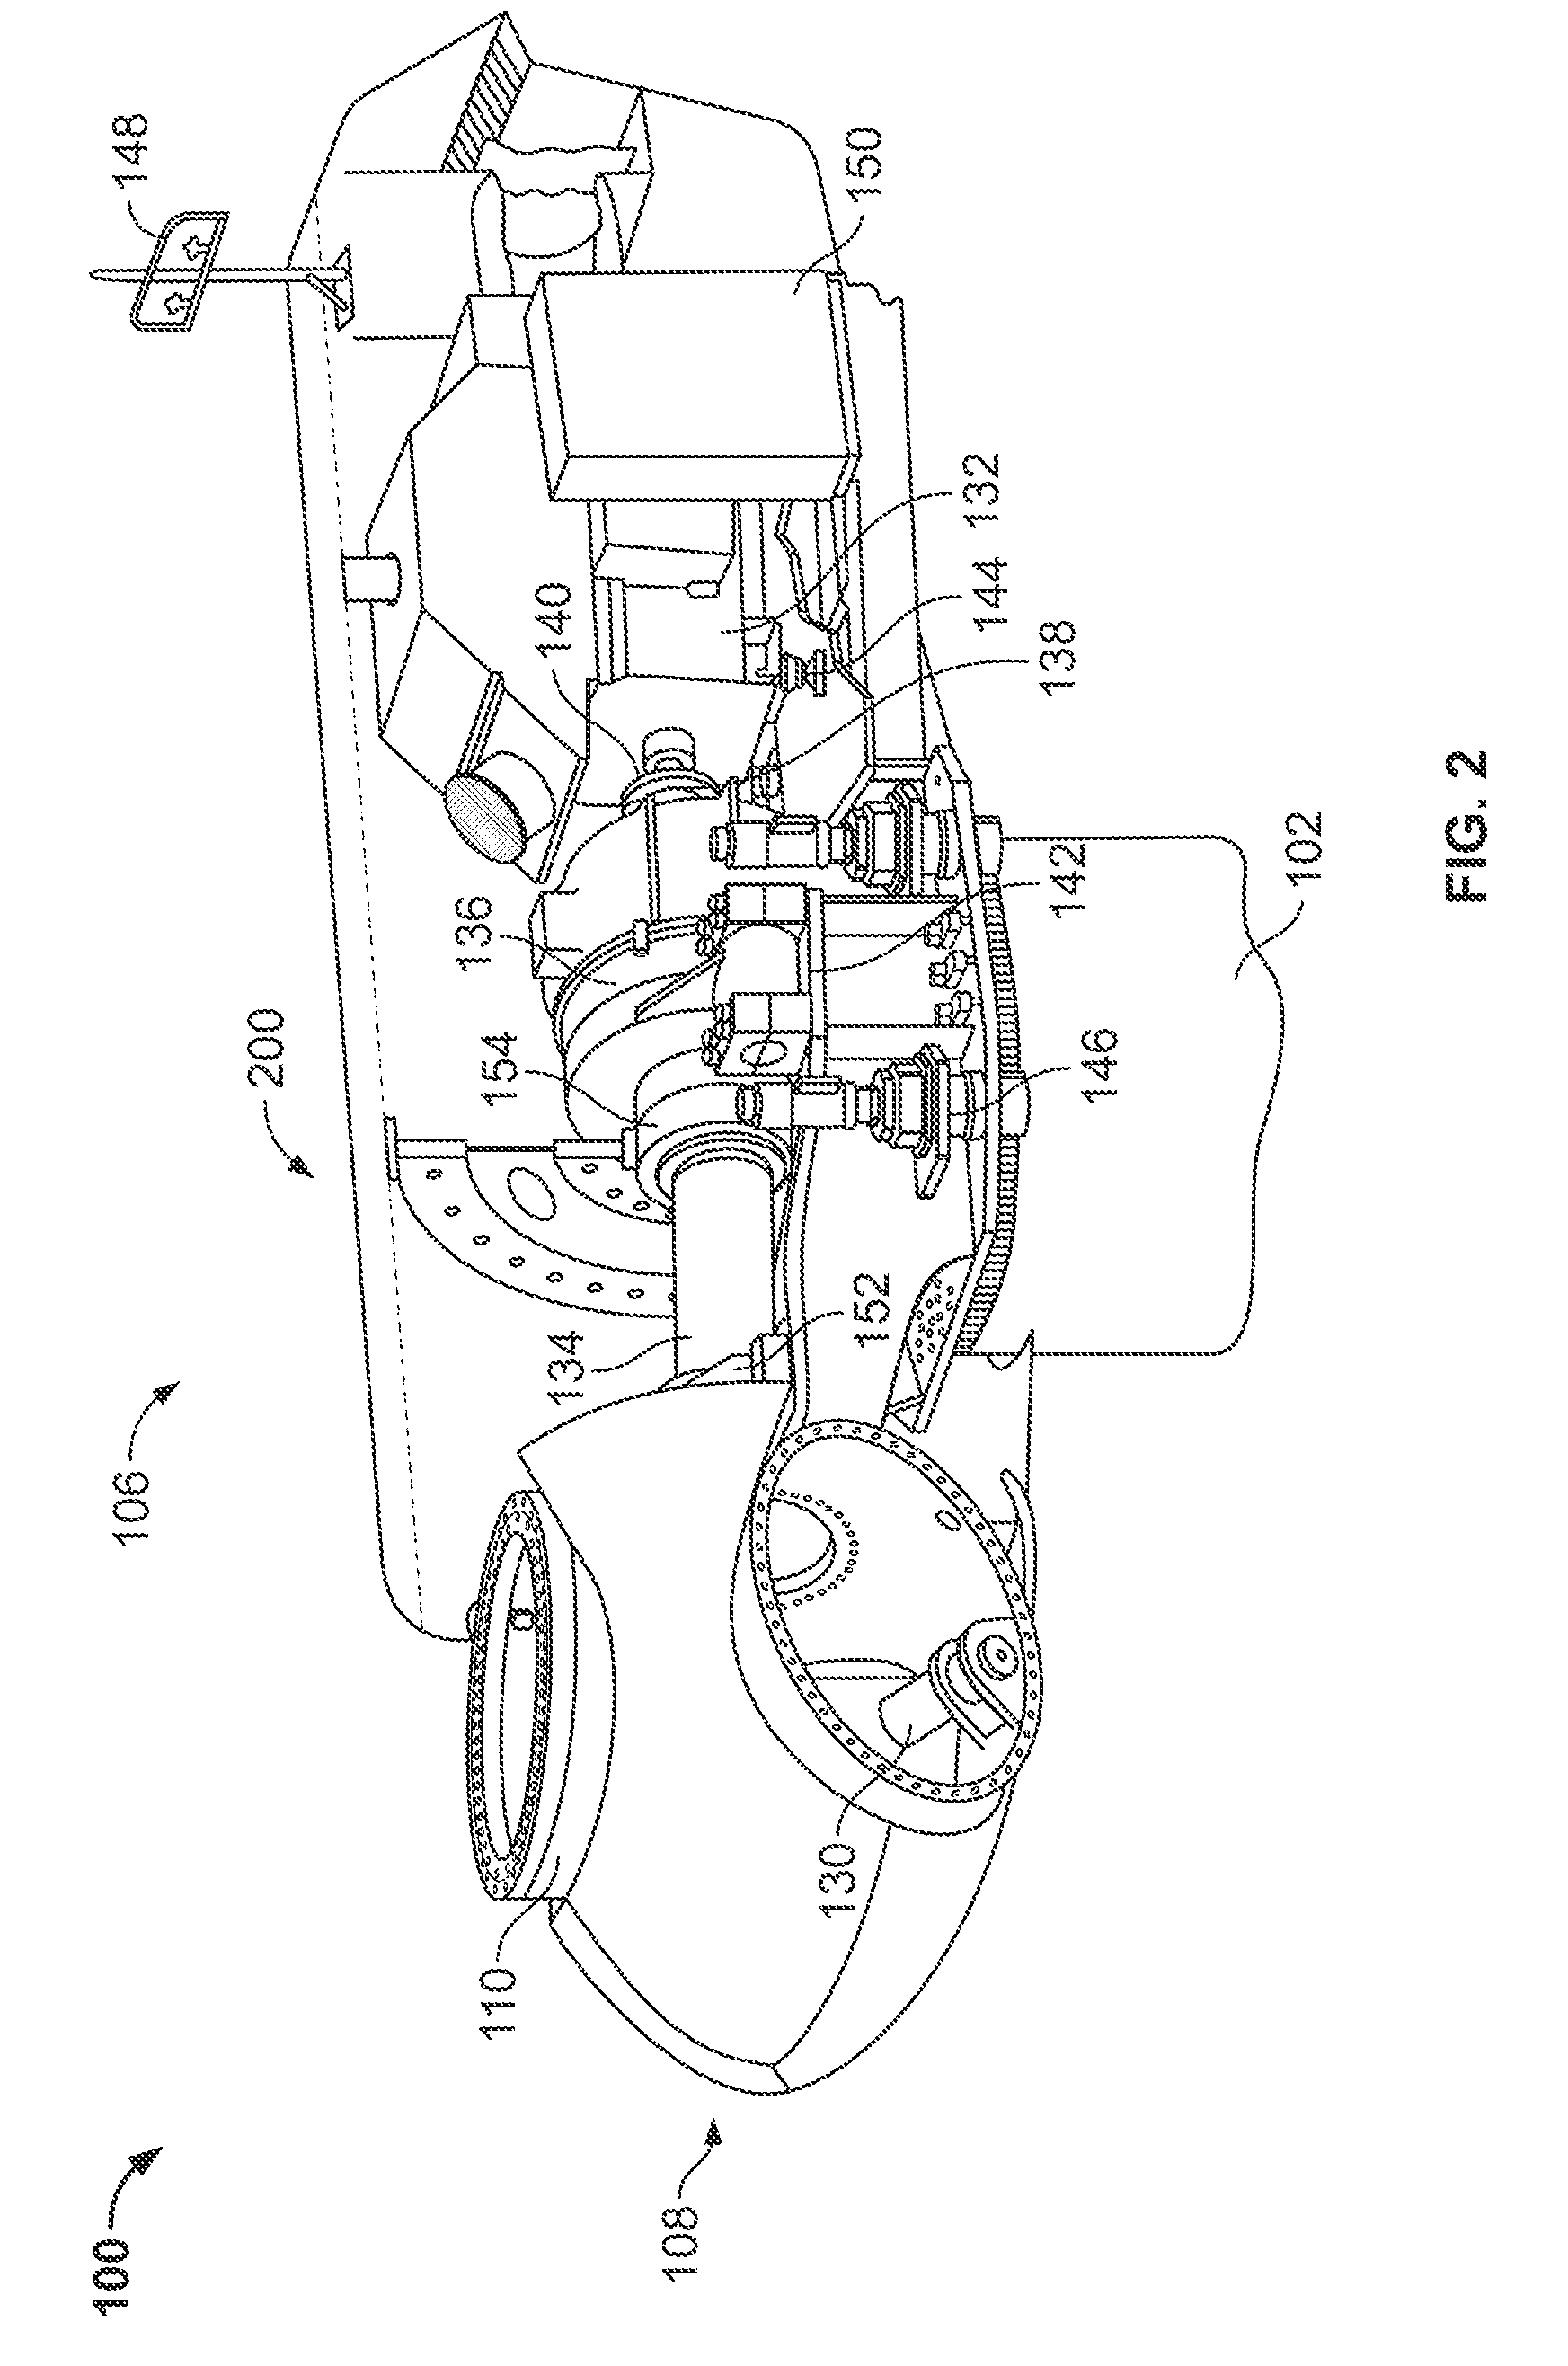 Lubrication heating system and wind turbine incorporating same